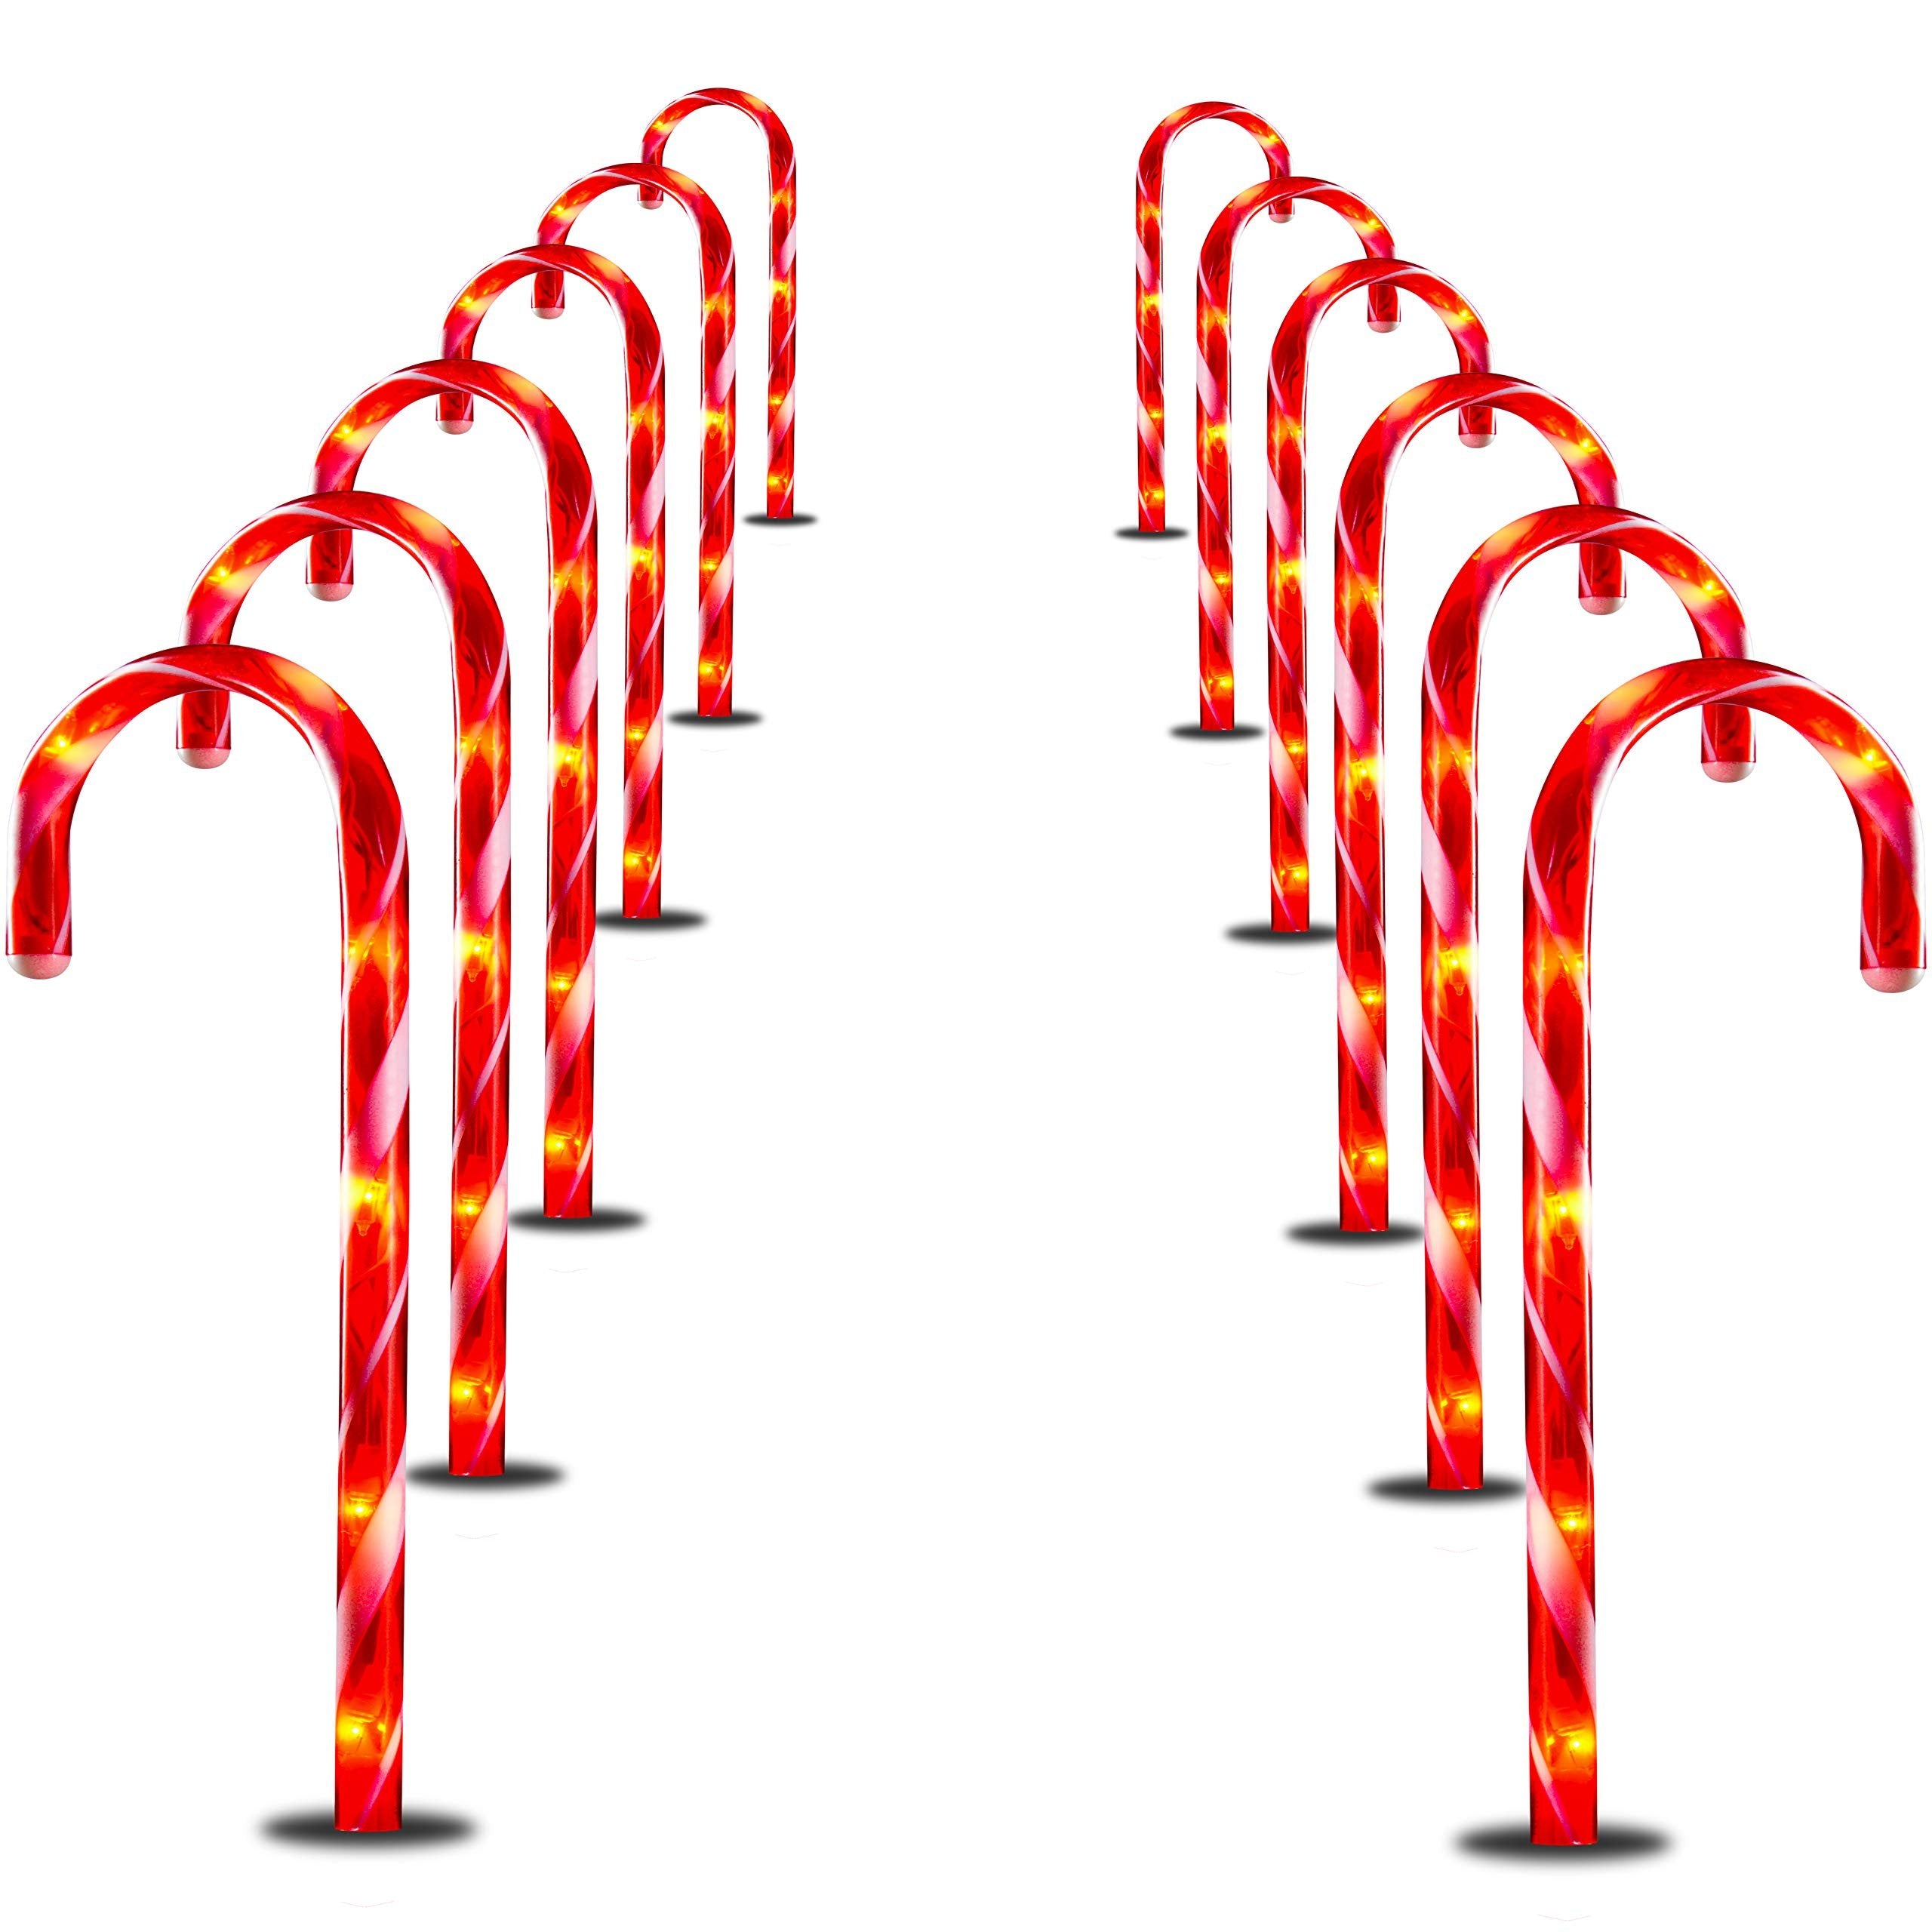 PREXTEX 12 Christmas Candy Cane Pathway Lights Markers for Indoor and Outdoor Use - Christmas Light Up Candy Cane Walkway Outside (2 Sets of 6 Candy Canes, 17 Inches Tall)